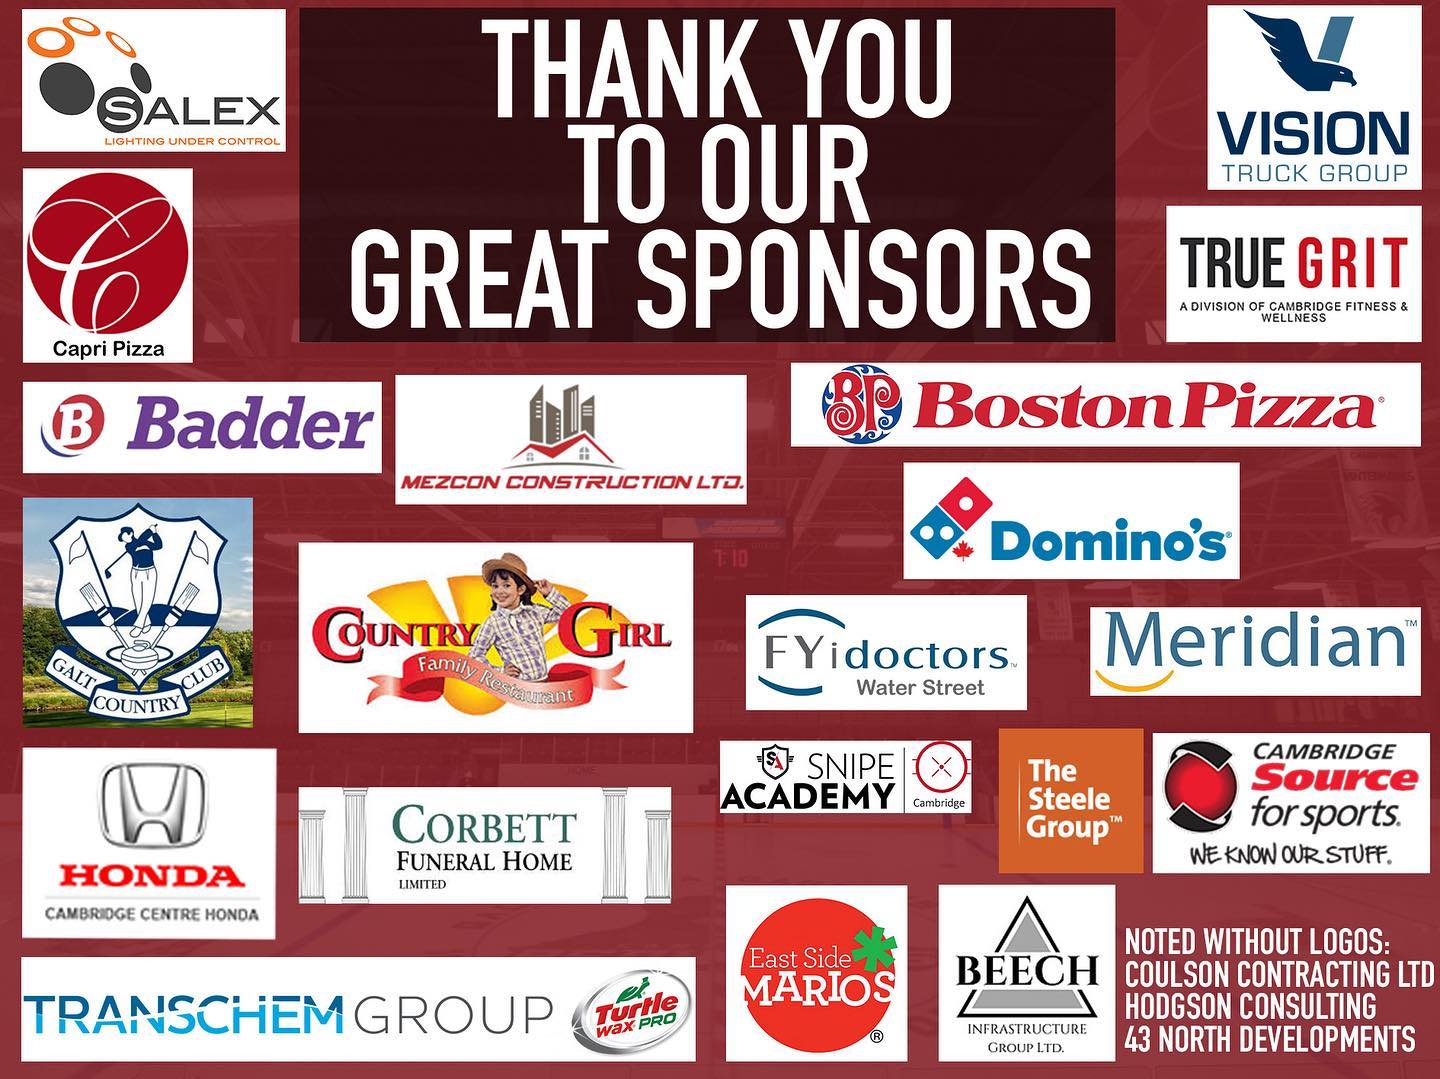 This season would not be possible without our amazing sponsors for our 2021/22 hockey season. 

Please give each of our sponsors some love by checking out the products/services they have to offer and support some local and family owned businesses!